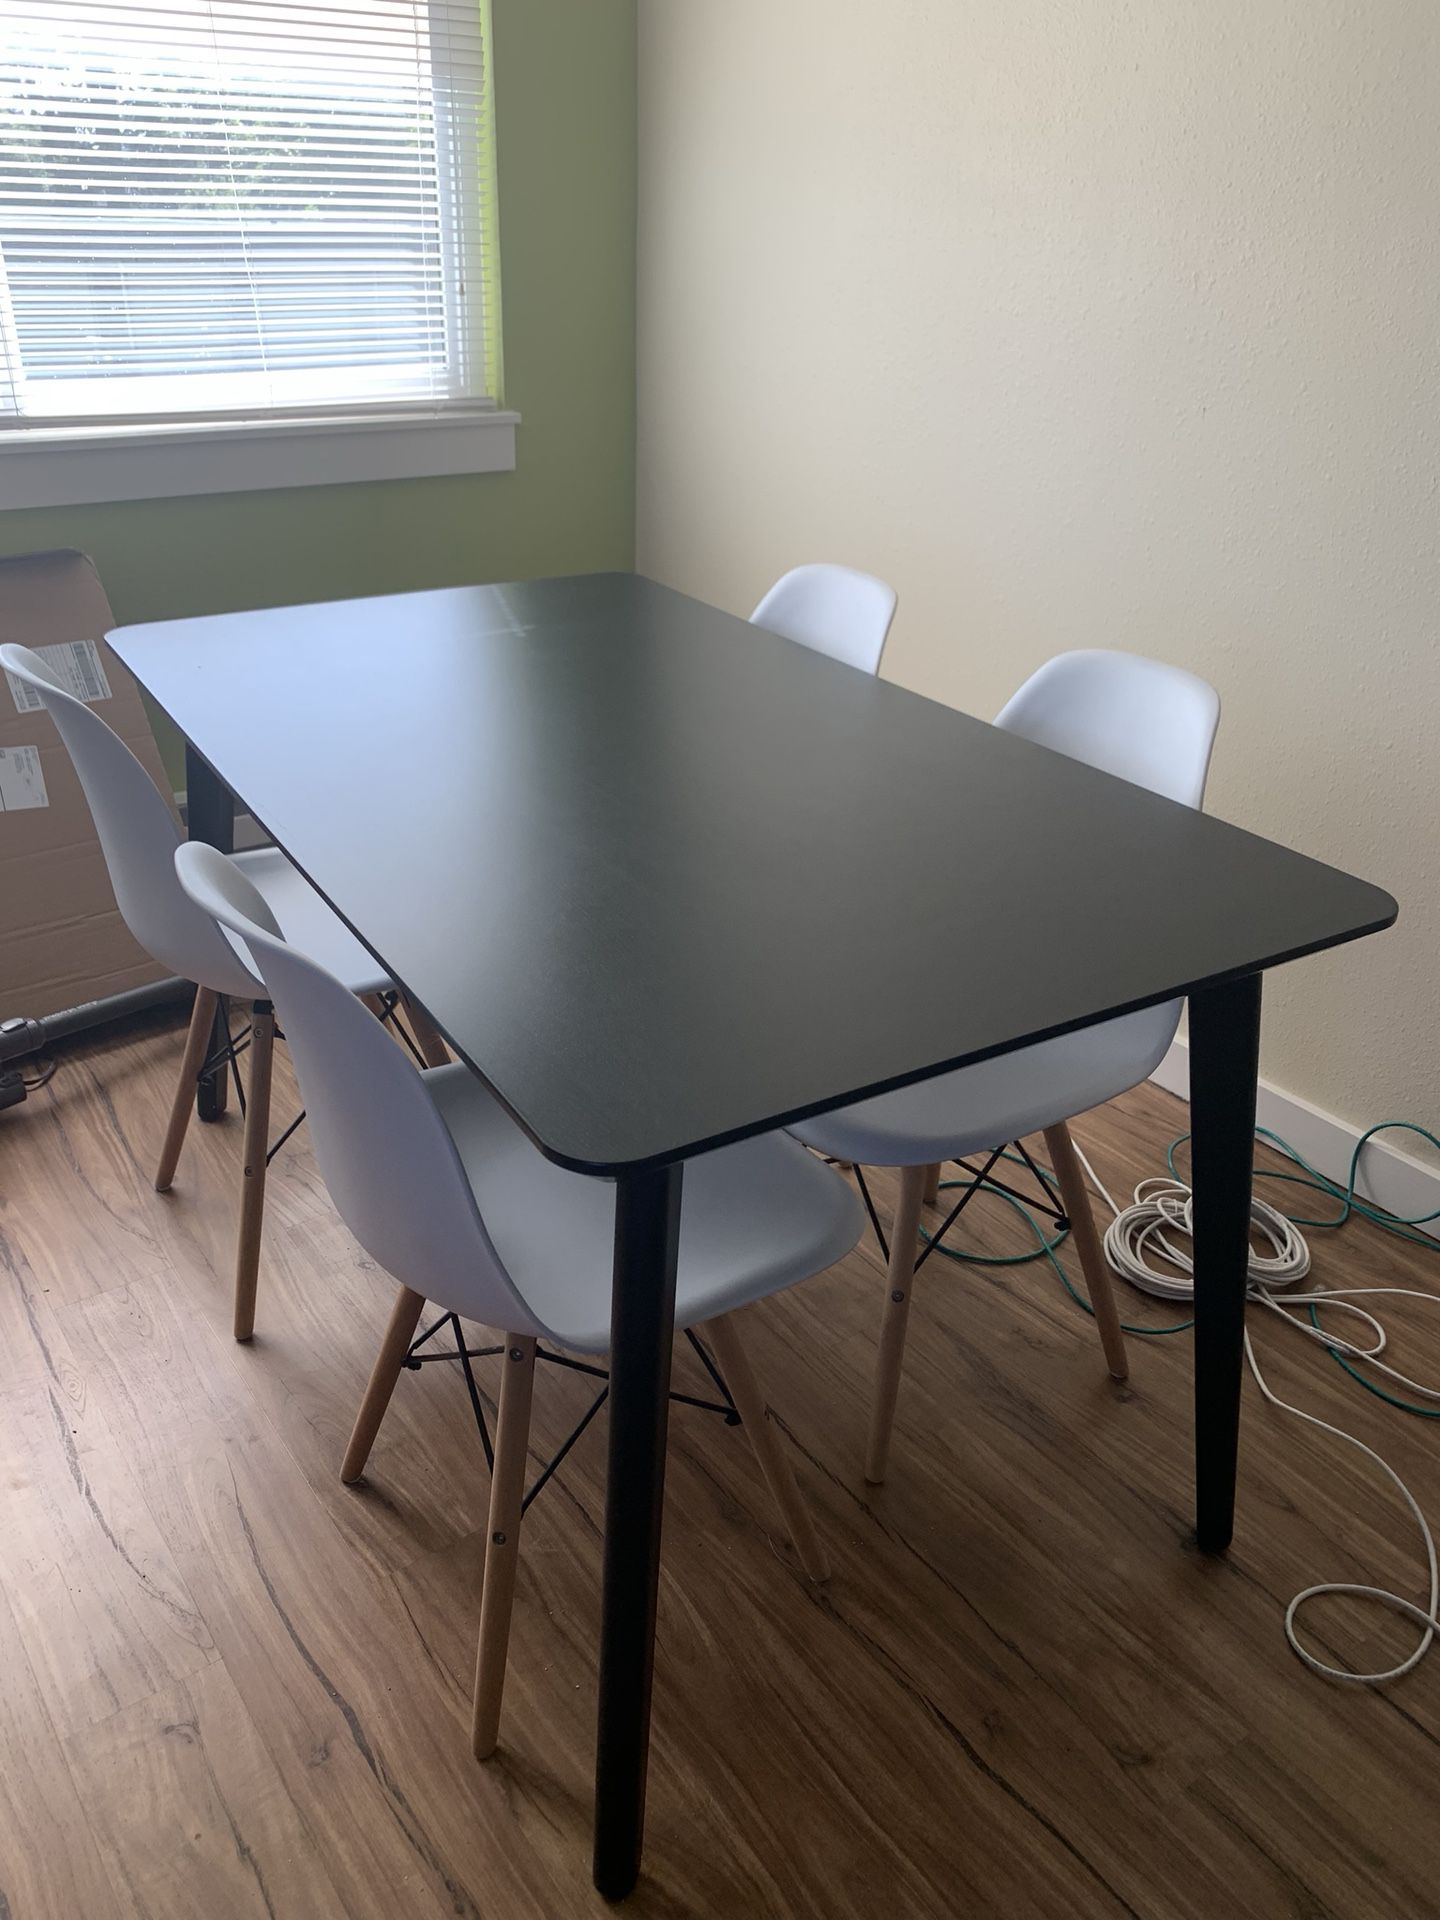 Ikea Dining Table - black Lisabo model (chairs not included)